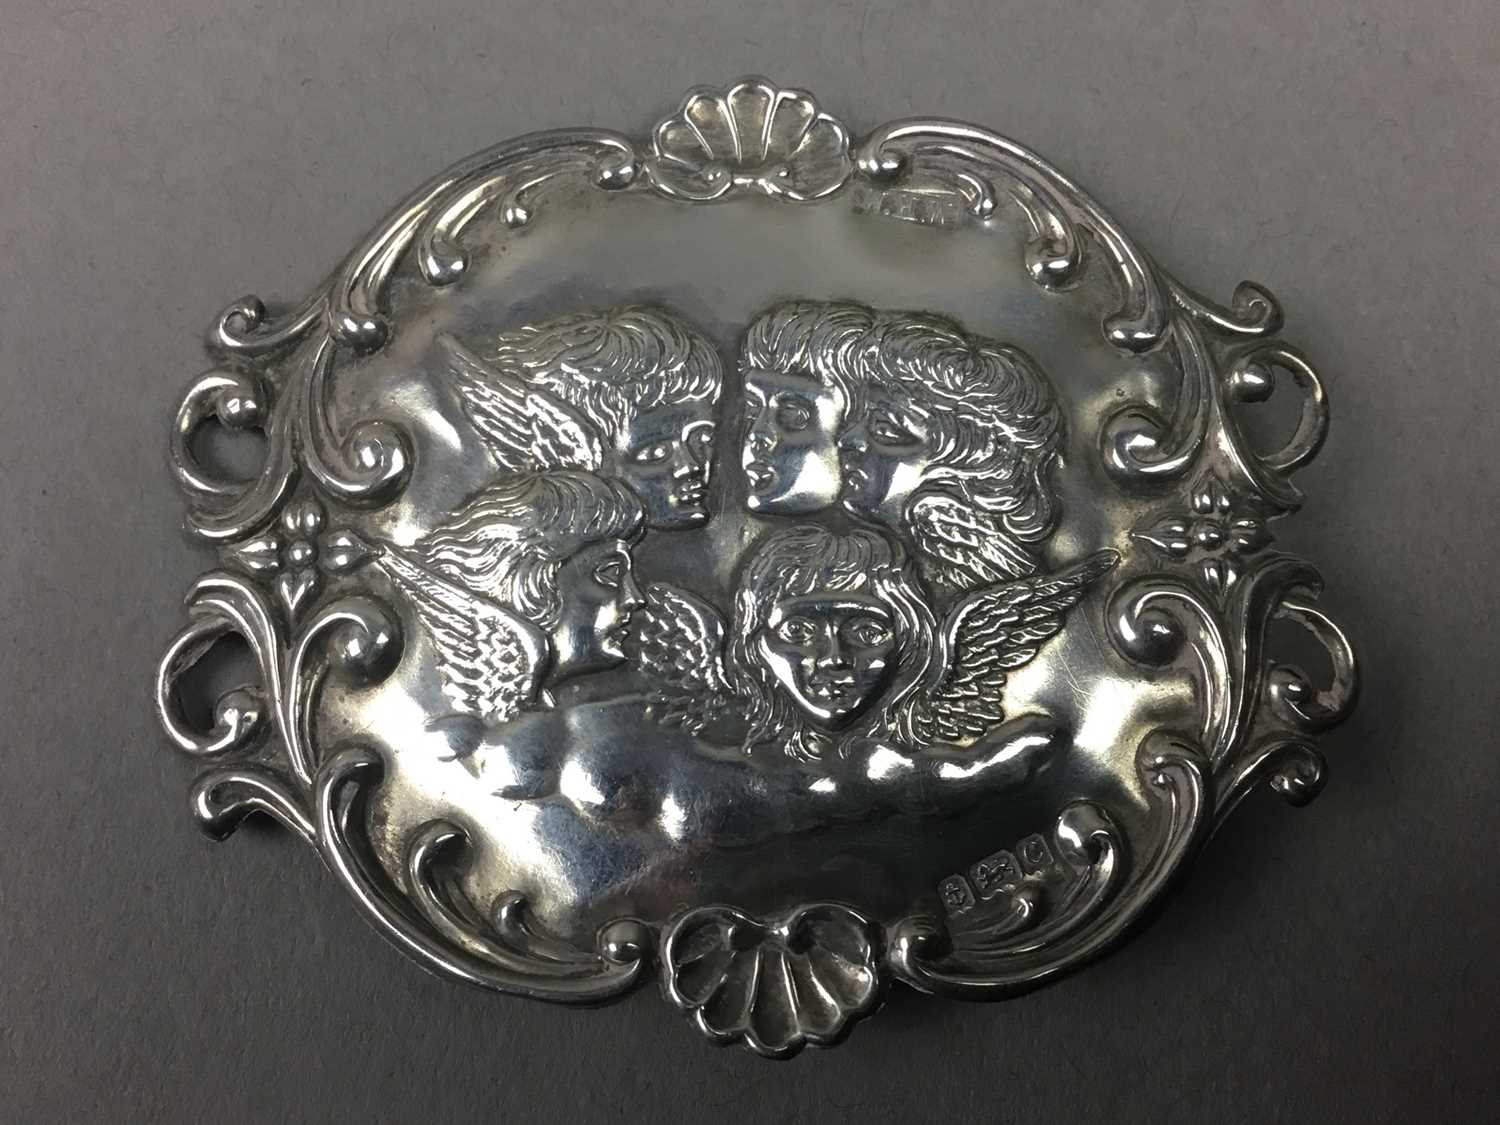 Lot 10 - A SILVER BROOCH DEPICTING REYNOLD'S ANGELS, ALONG WITH PLATED BELT AND SPOON